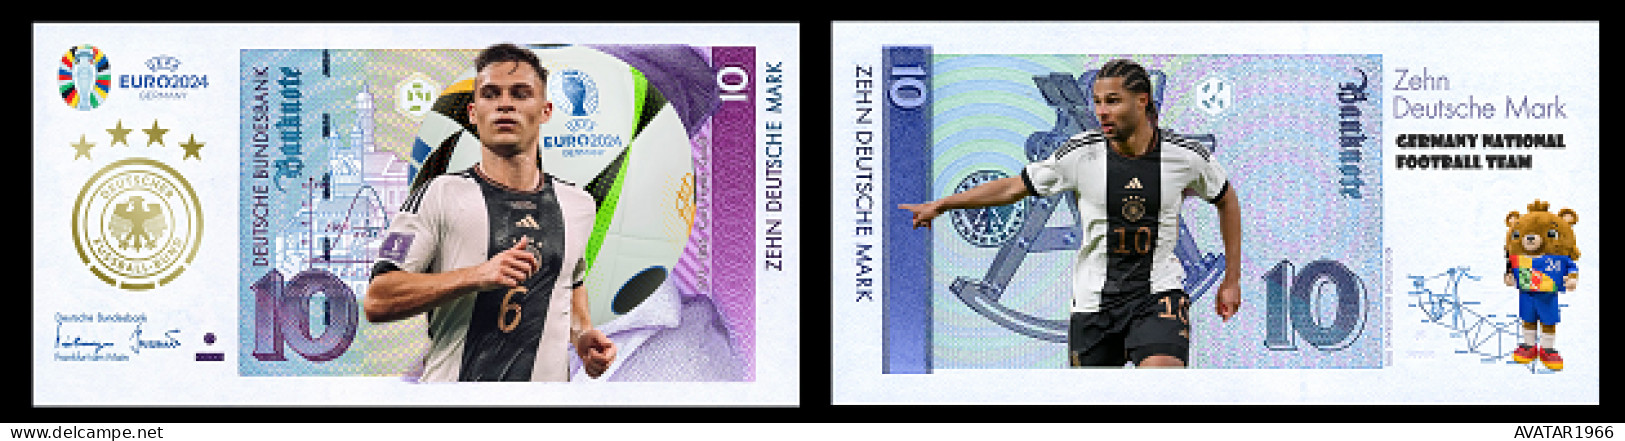 UEFA European Football Championship 2024 Qualified Country  Germany  8 Pieces Germany Fantasy Paper Money - Gedenkausgaben